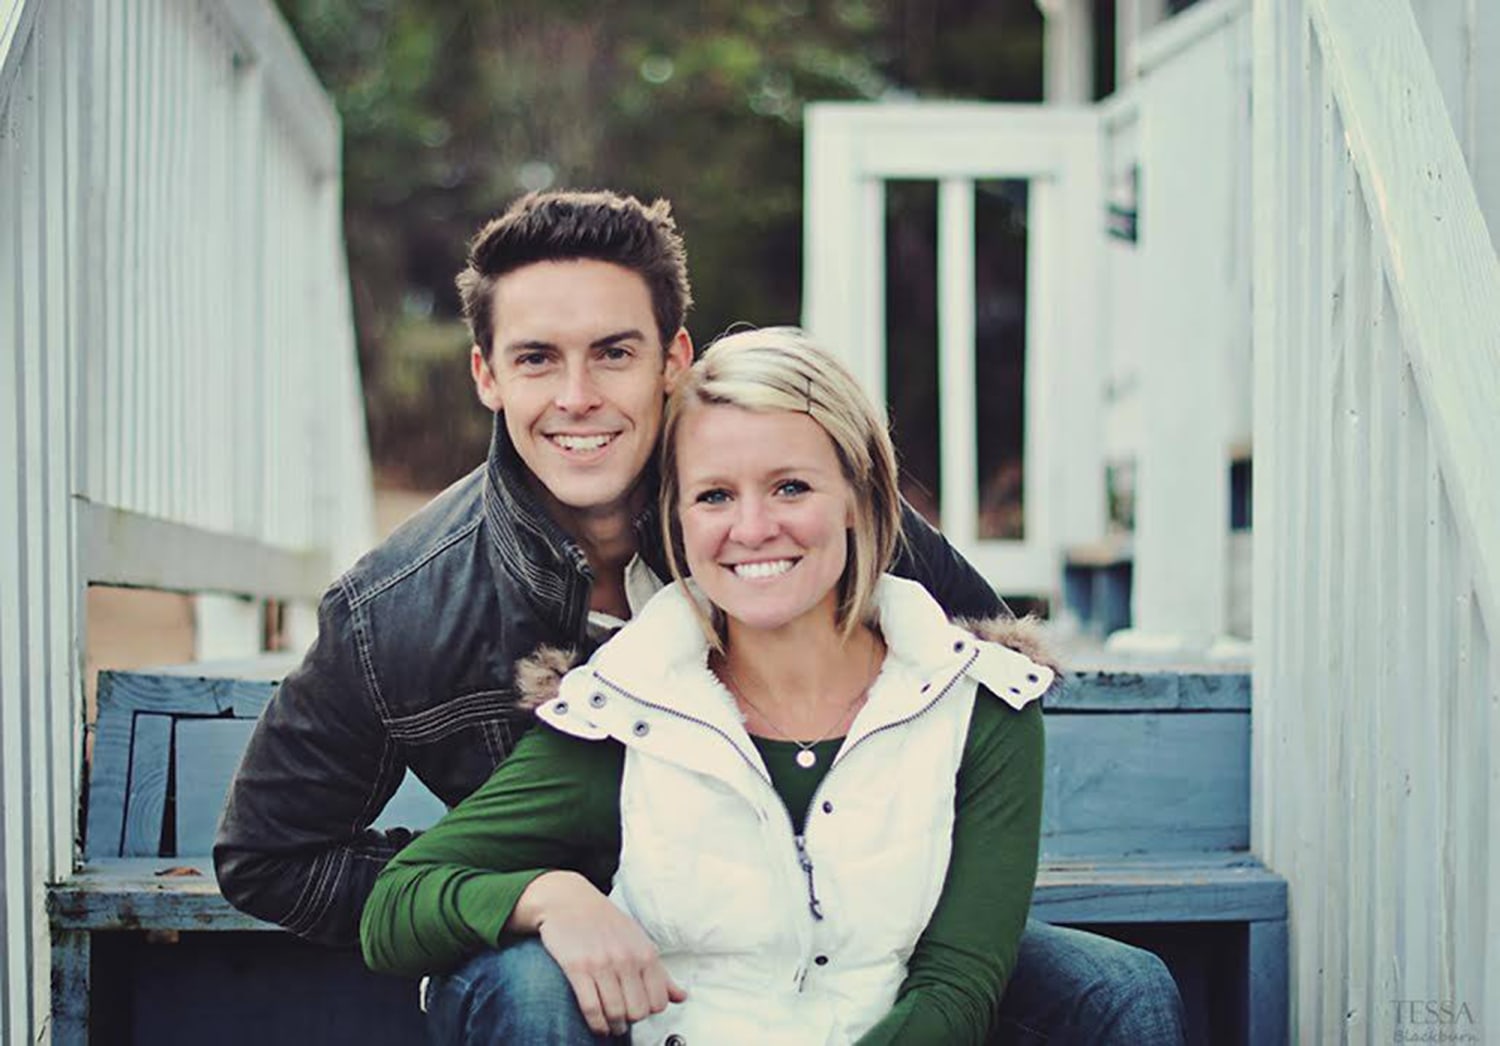 Two Charged With Murdering Pastors Wife Amanda Blackburn pic